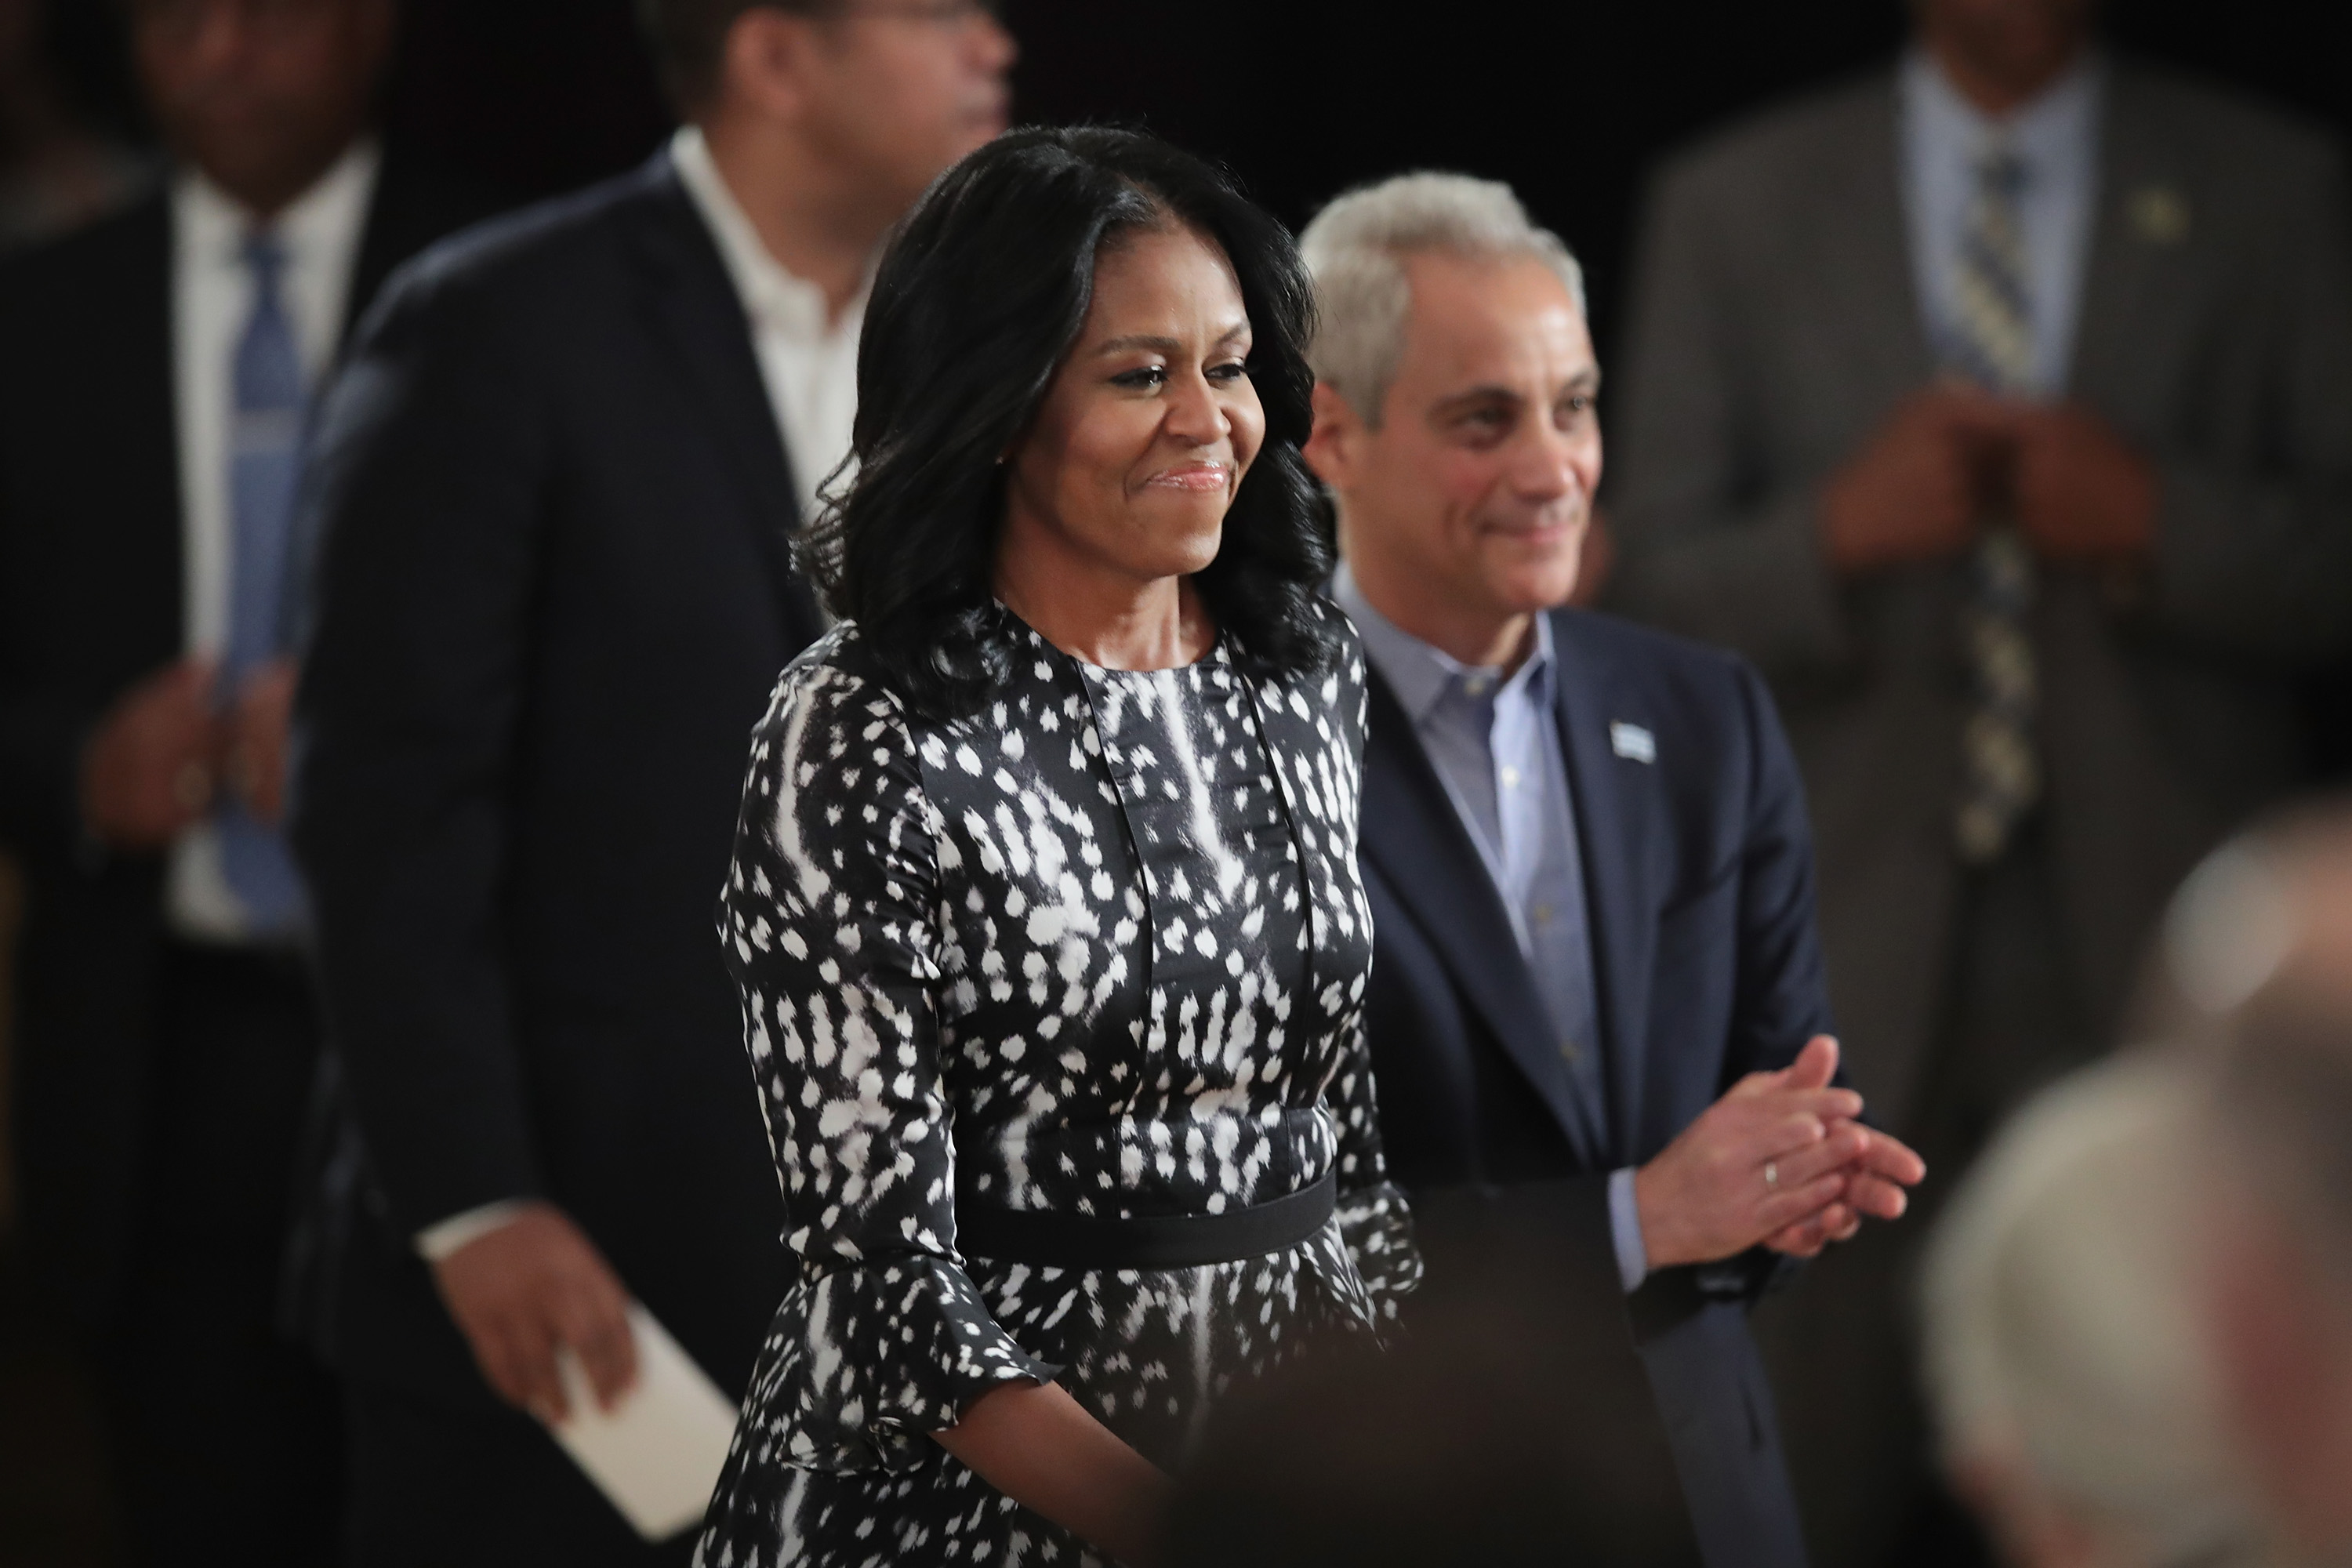 Former first lady Michelle Obama and Chicago Mayor Rahm Emanuel arrive for a roundtable discussion at the South Shore Cultural Center about the Obama Presidential Center, which is scheduled to be built in nearby Jackson Park, on May 3, 2017 in Chicago, Illinois. The Presidential Center design envisions three buildings, a museum, library and forum. (Scott Olson—Getty Images)